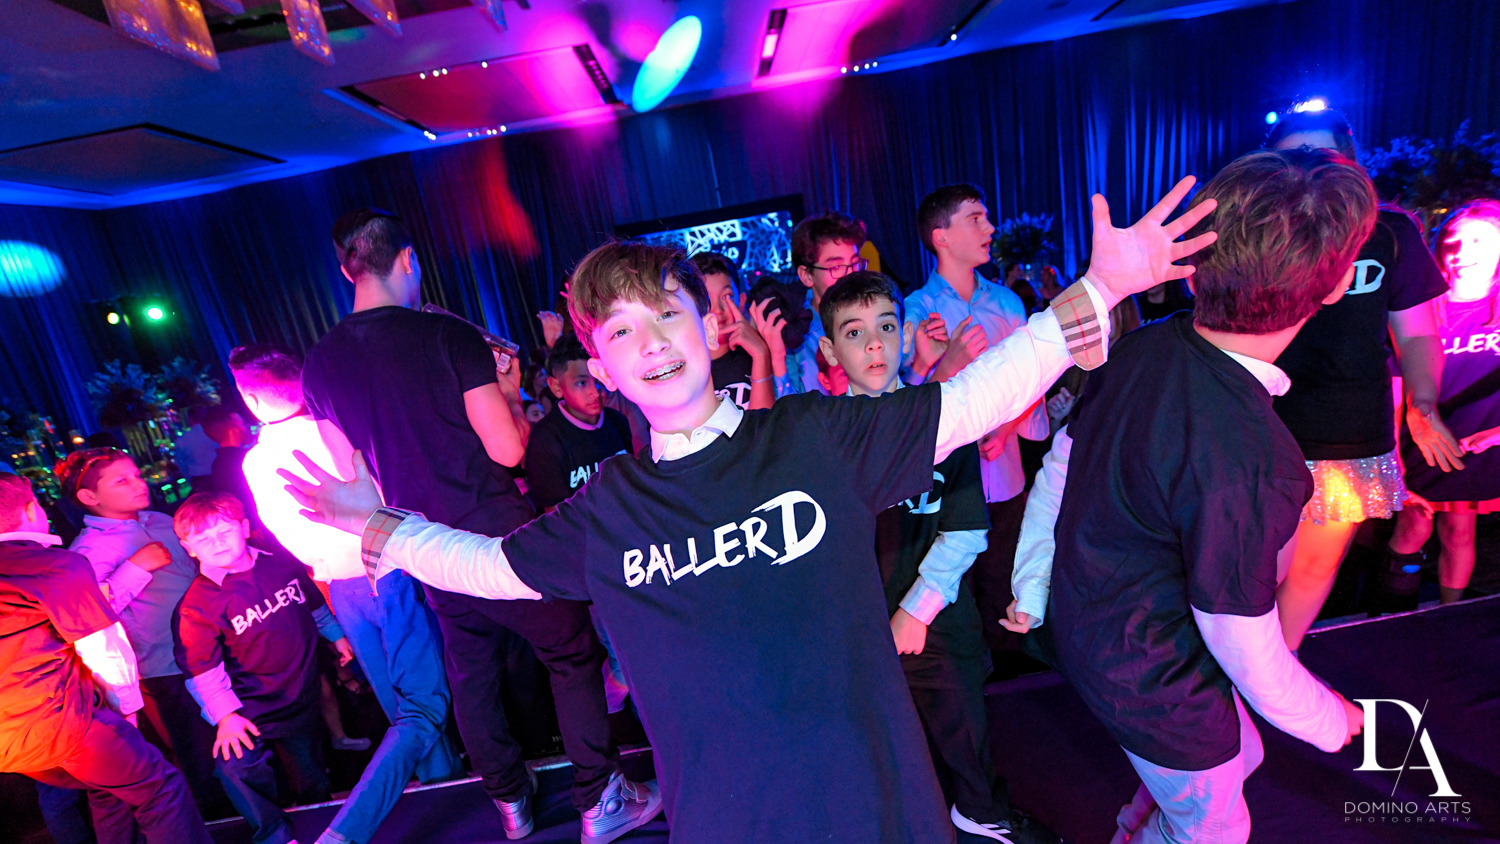 Baller Tshirt at Modern All Blue Decor Bar Mitzvah at Temple Beth Am Pinecrest by Domino Arts Photography